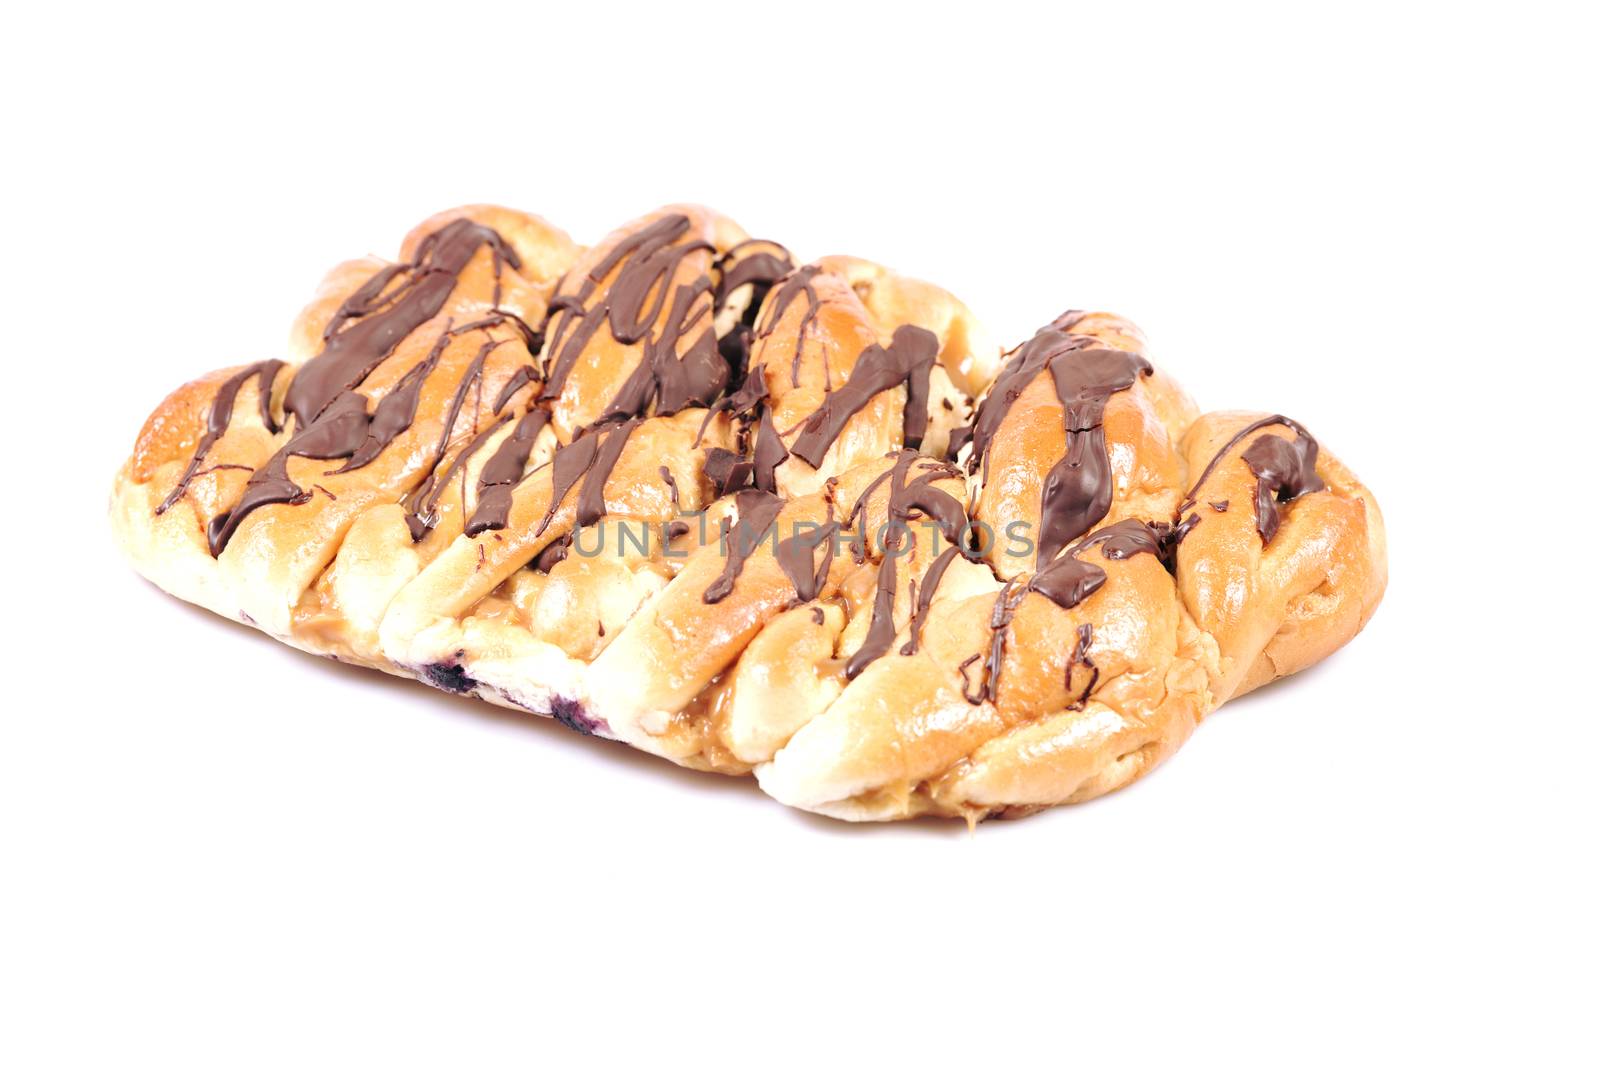 Chocolate and caramel danish pastry  by artistrobd